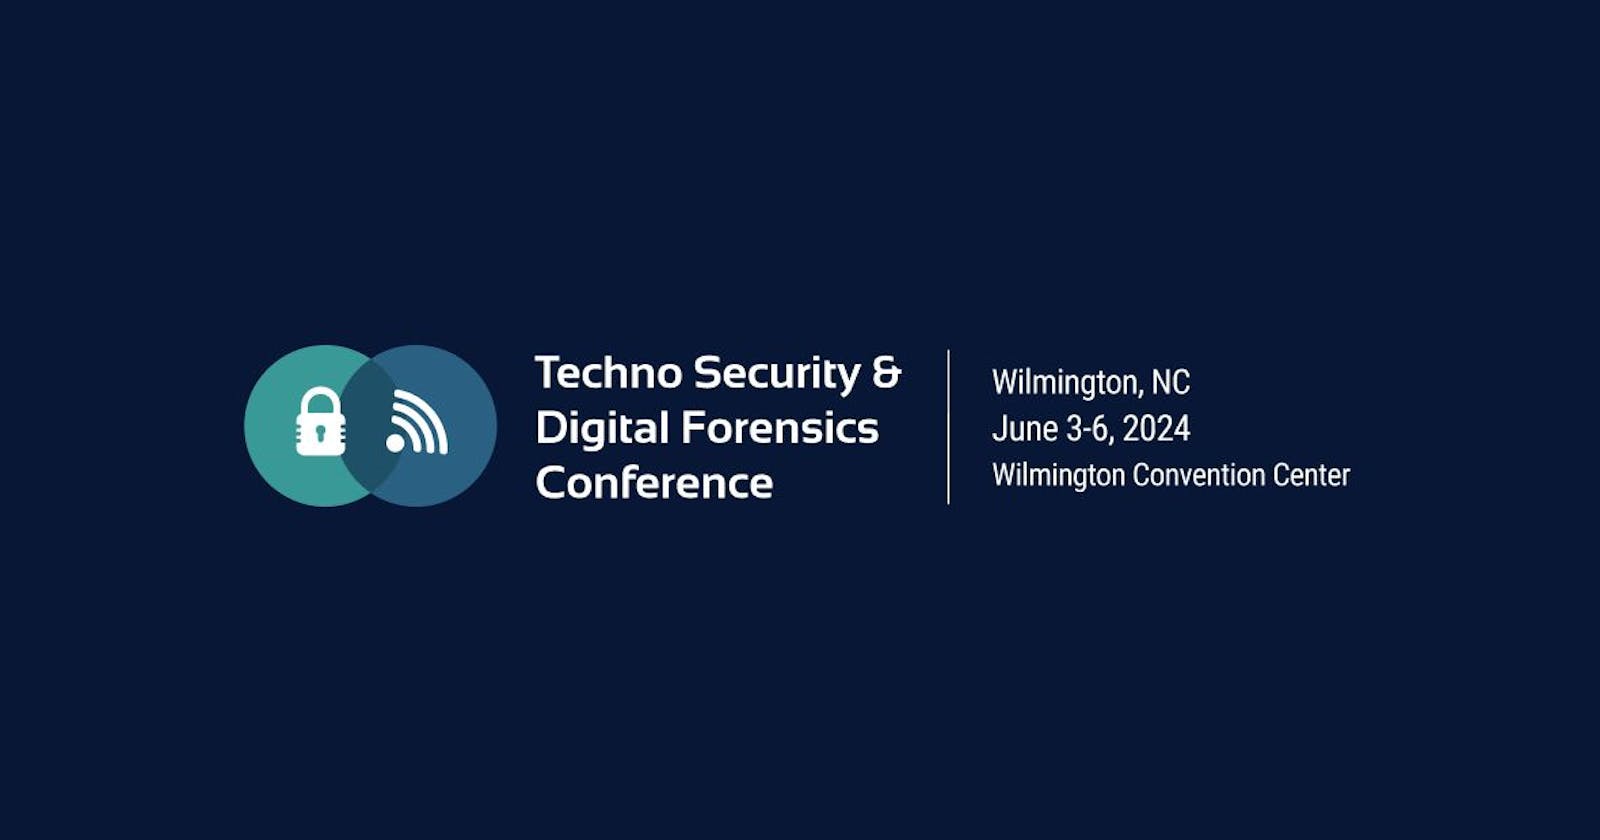 Techno Security & Digital Forensics Conference East 2023 - A community defending against ever evolving threats